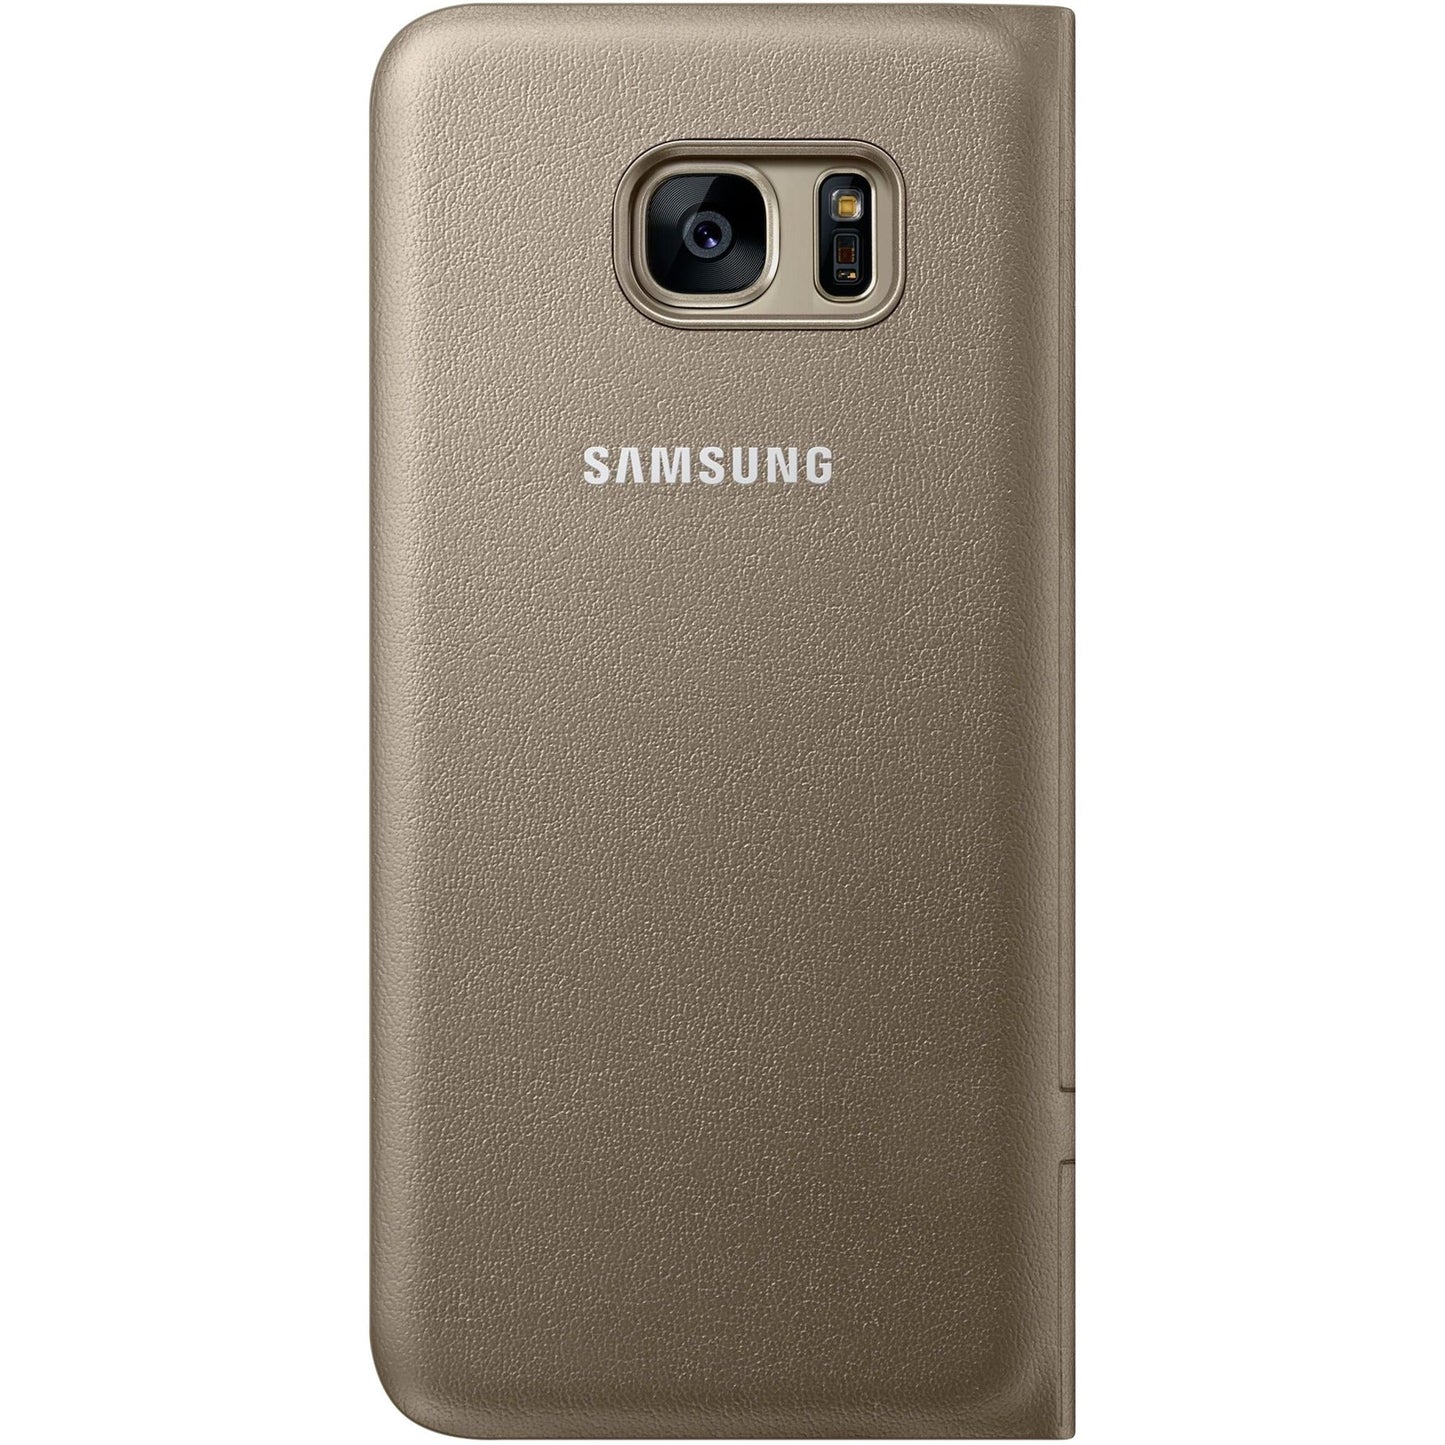 Samsung Carrying Case (Folio) Smartphone - Gold